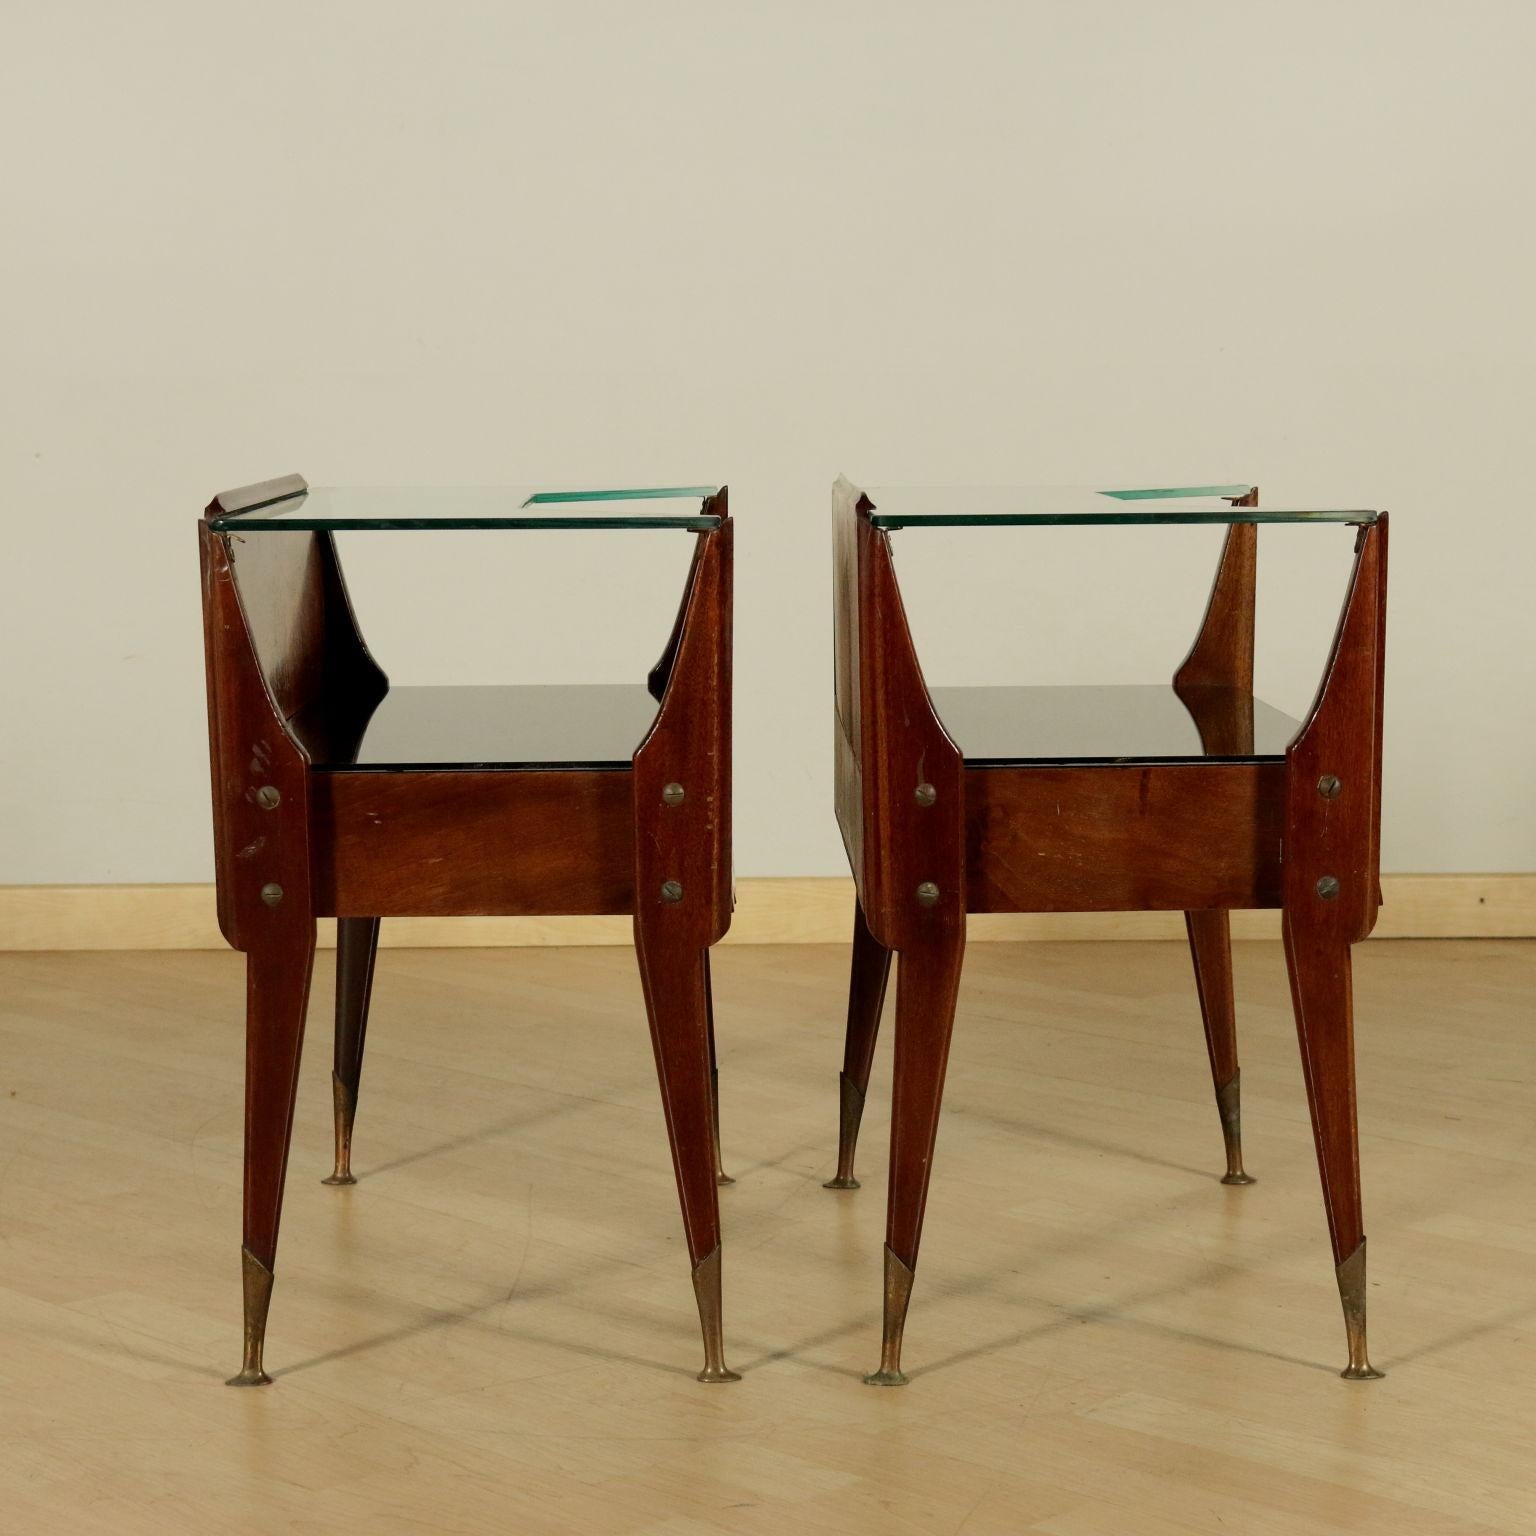 Mid-Century Modern Bedside Tables, wood, Back-Treated Glass Brass, Italy, 1950s-1960s